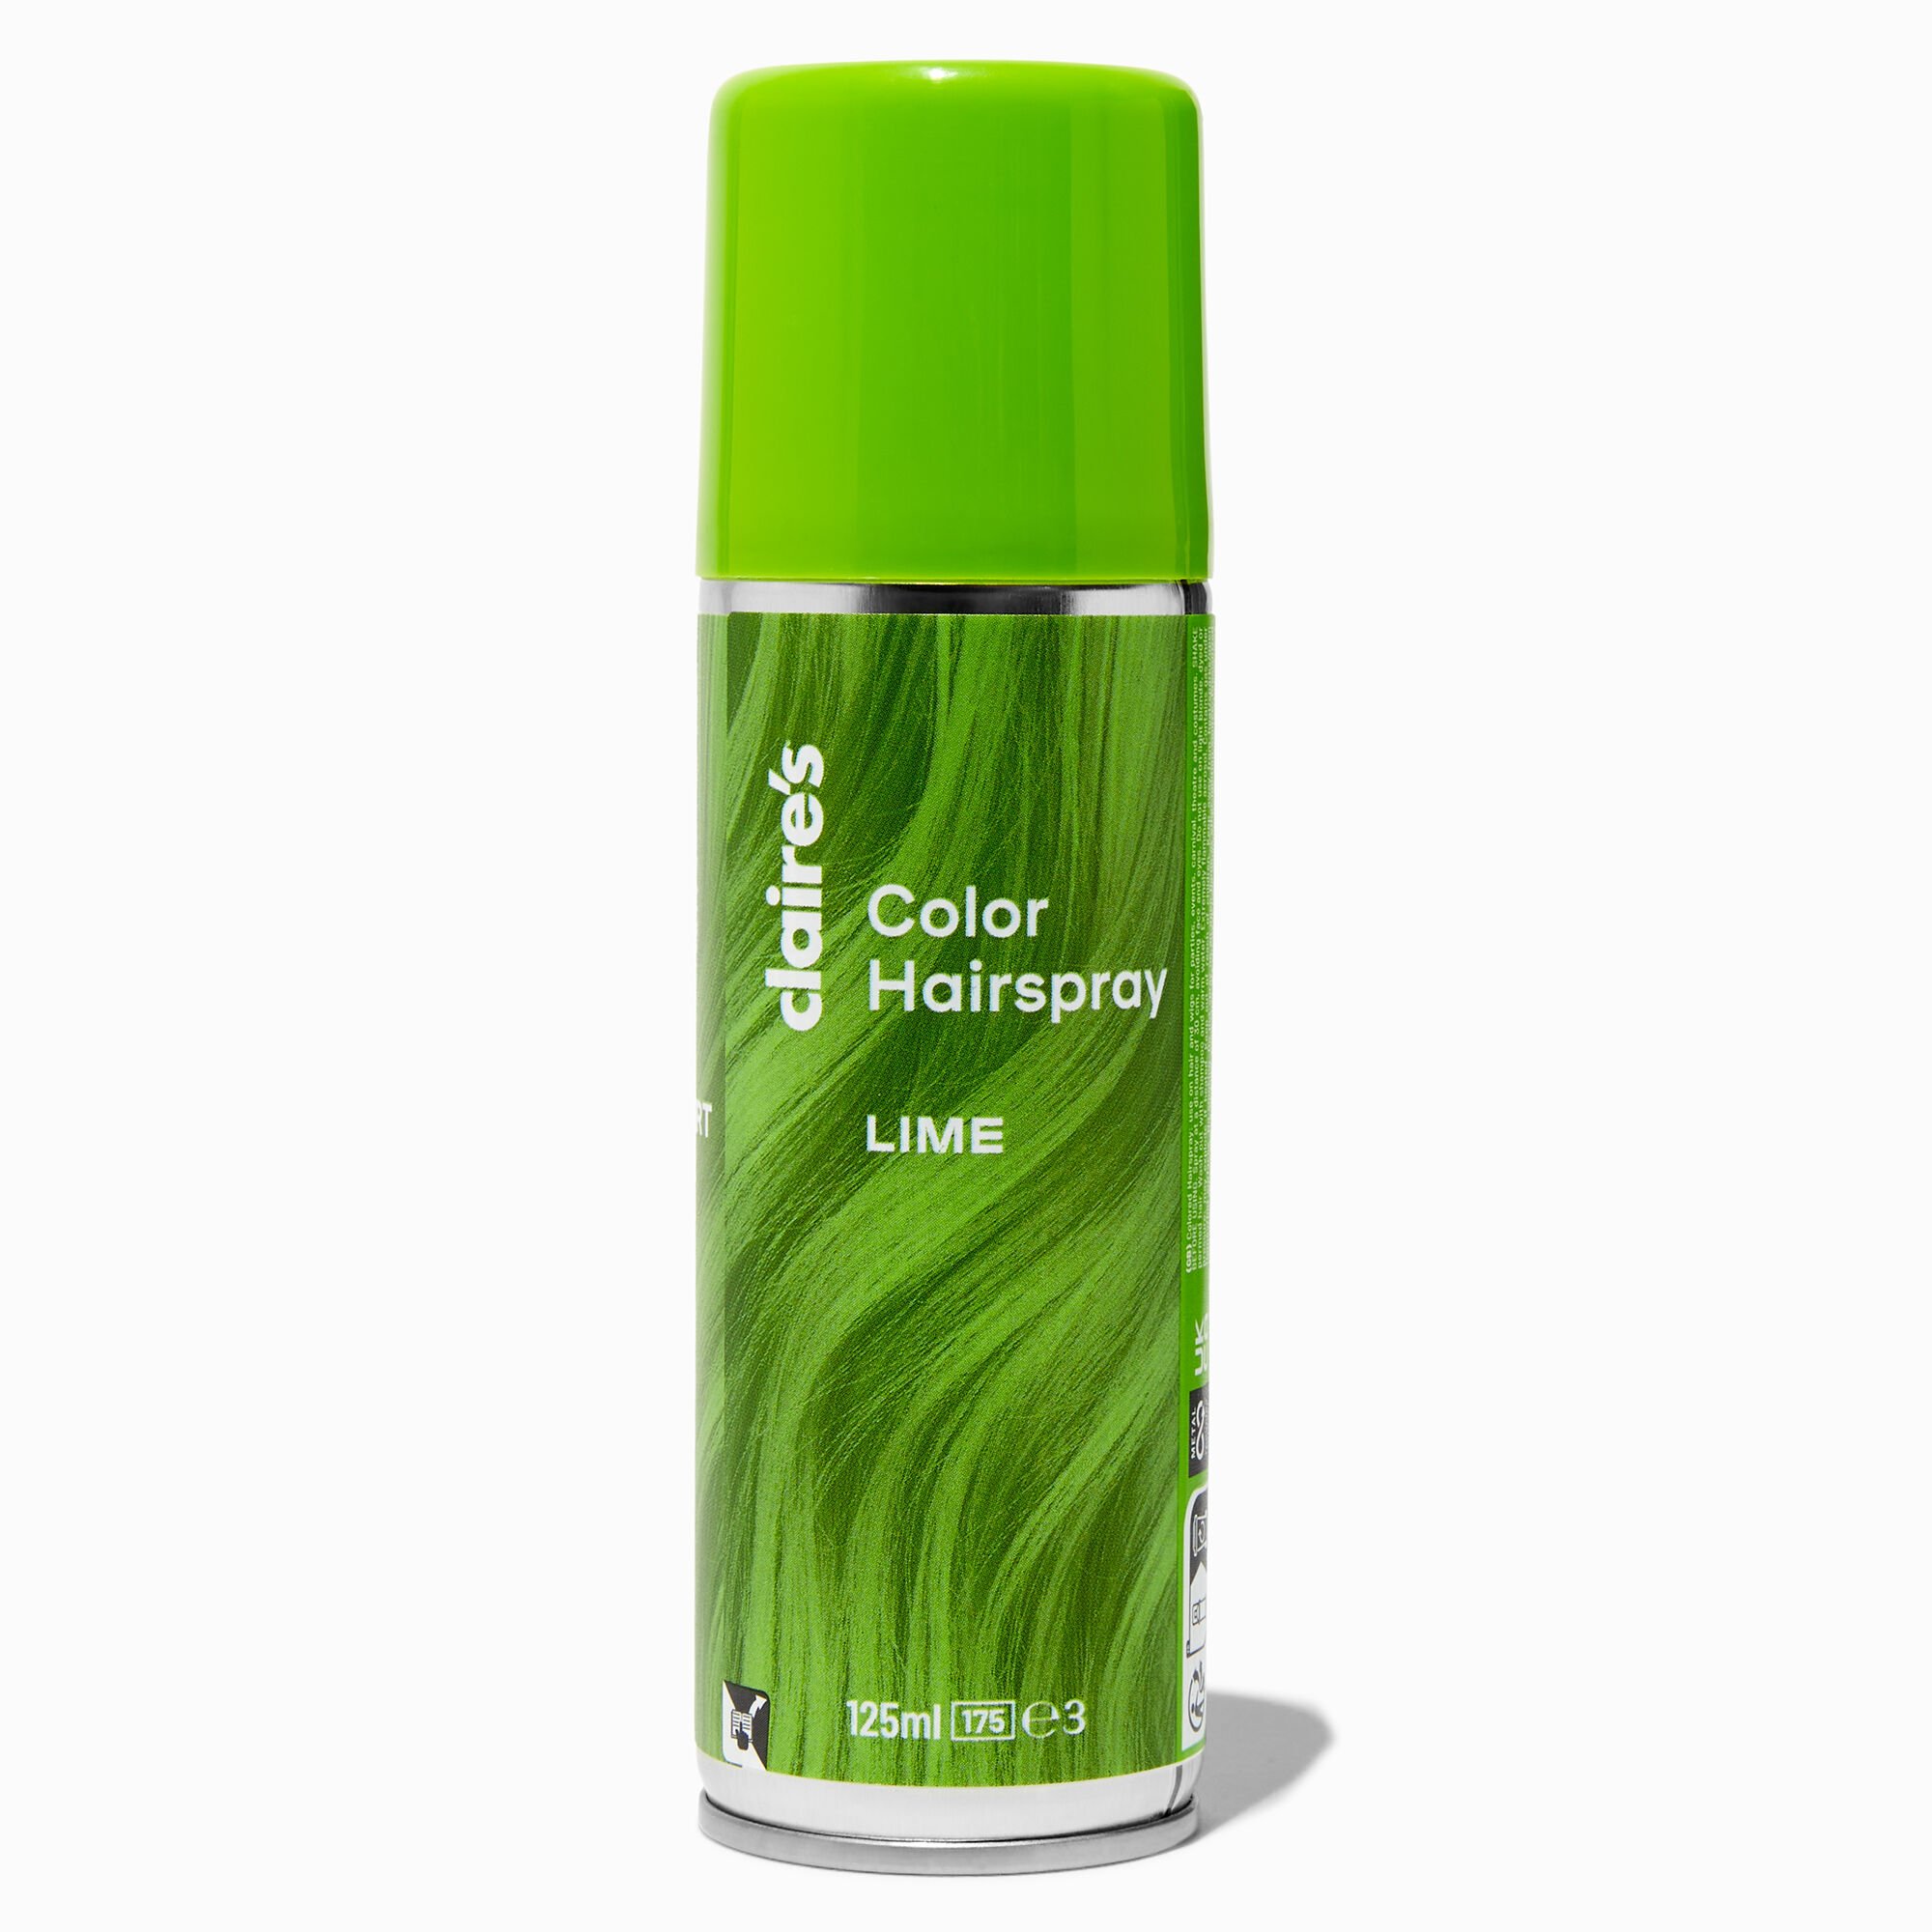 View Claires Lime Colour Hairspray Green information